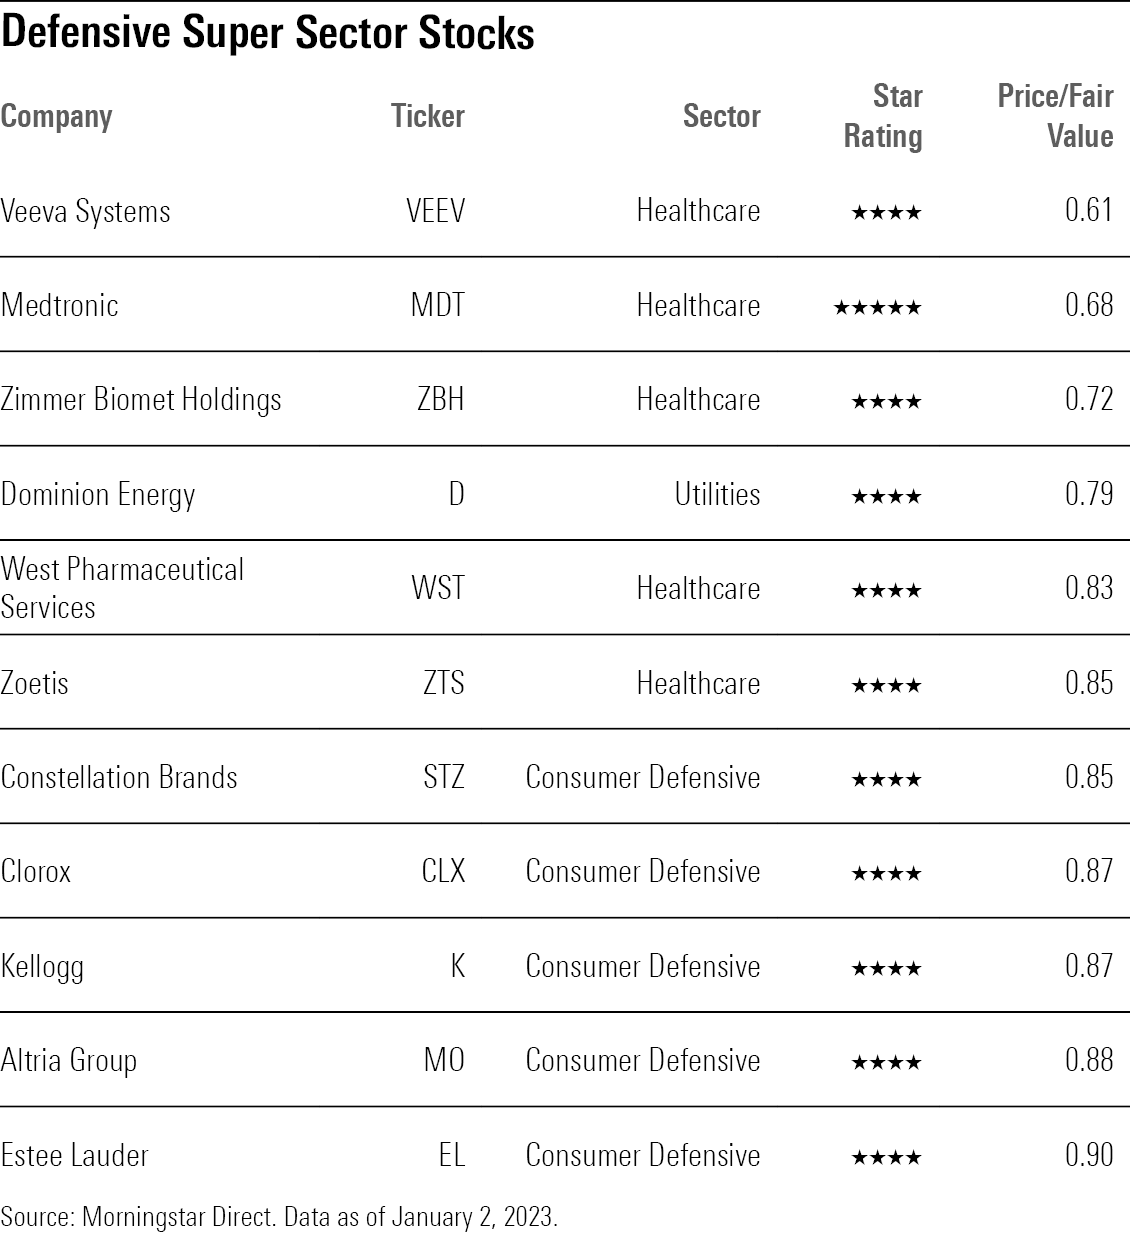 Undervalued stocks from the defensive super sector.